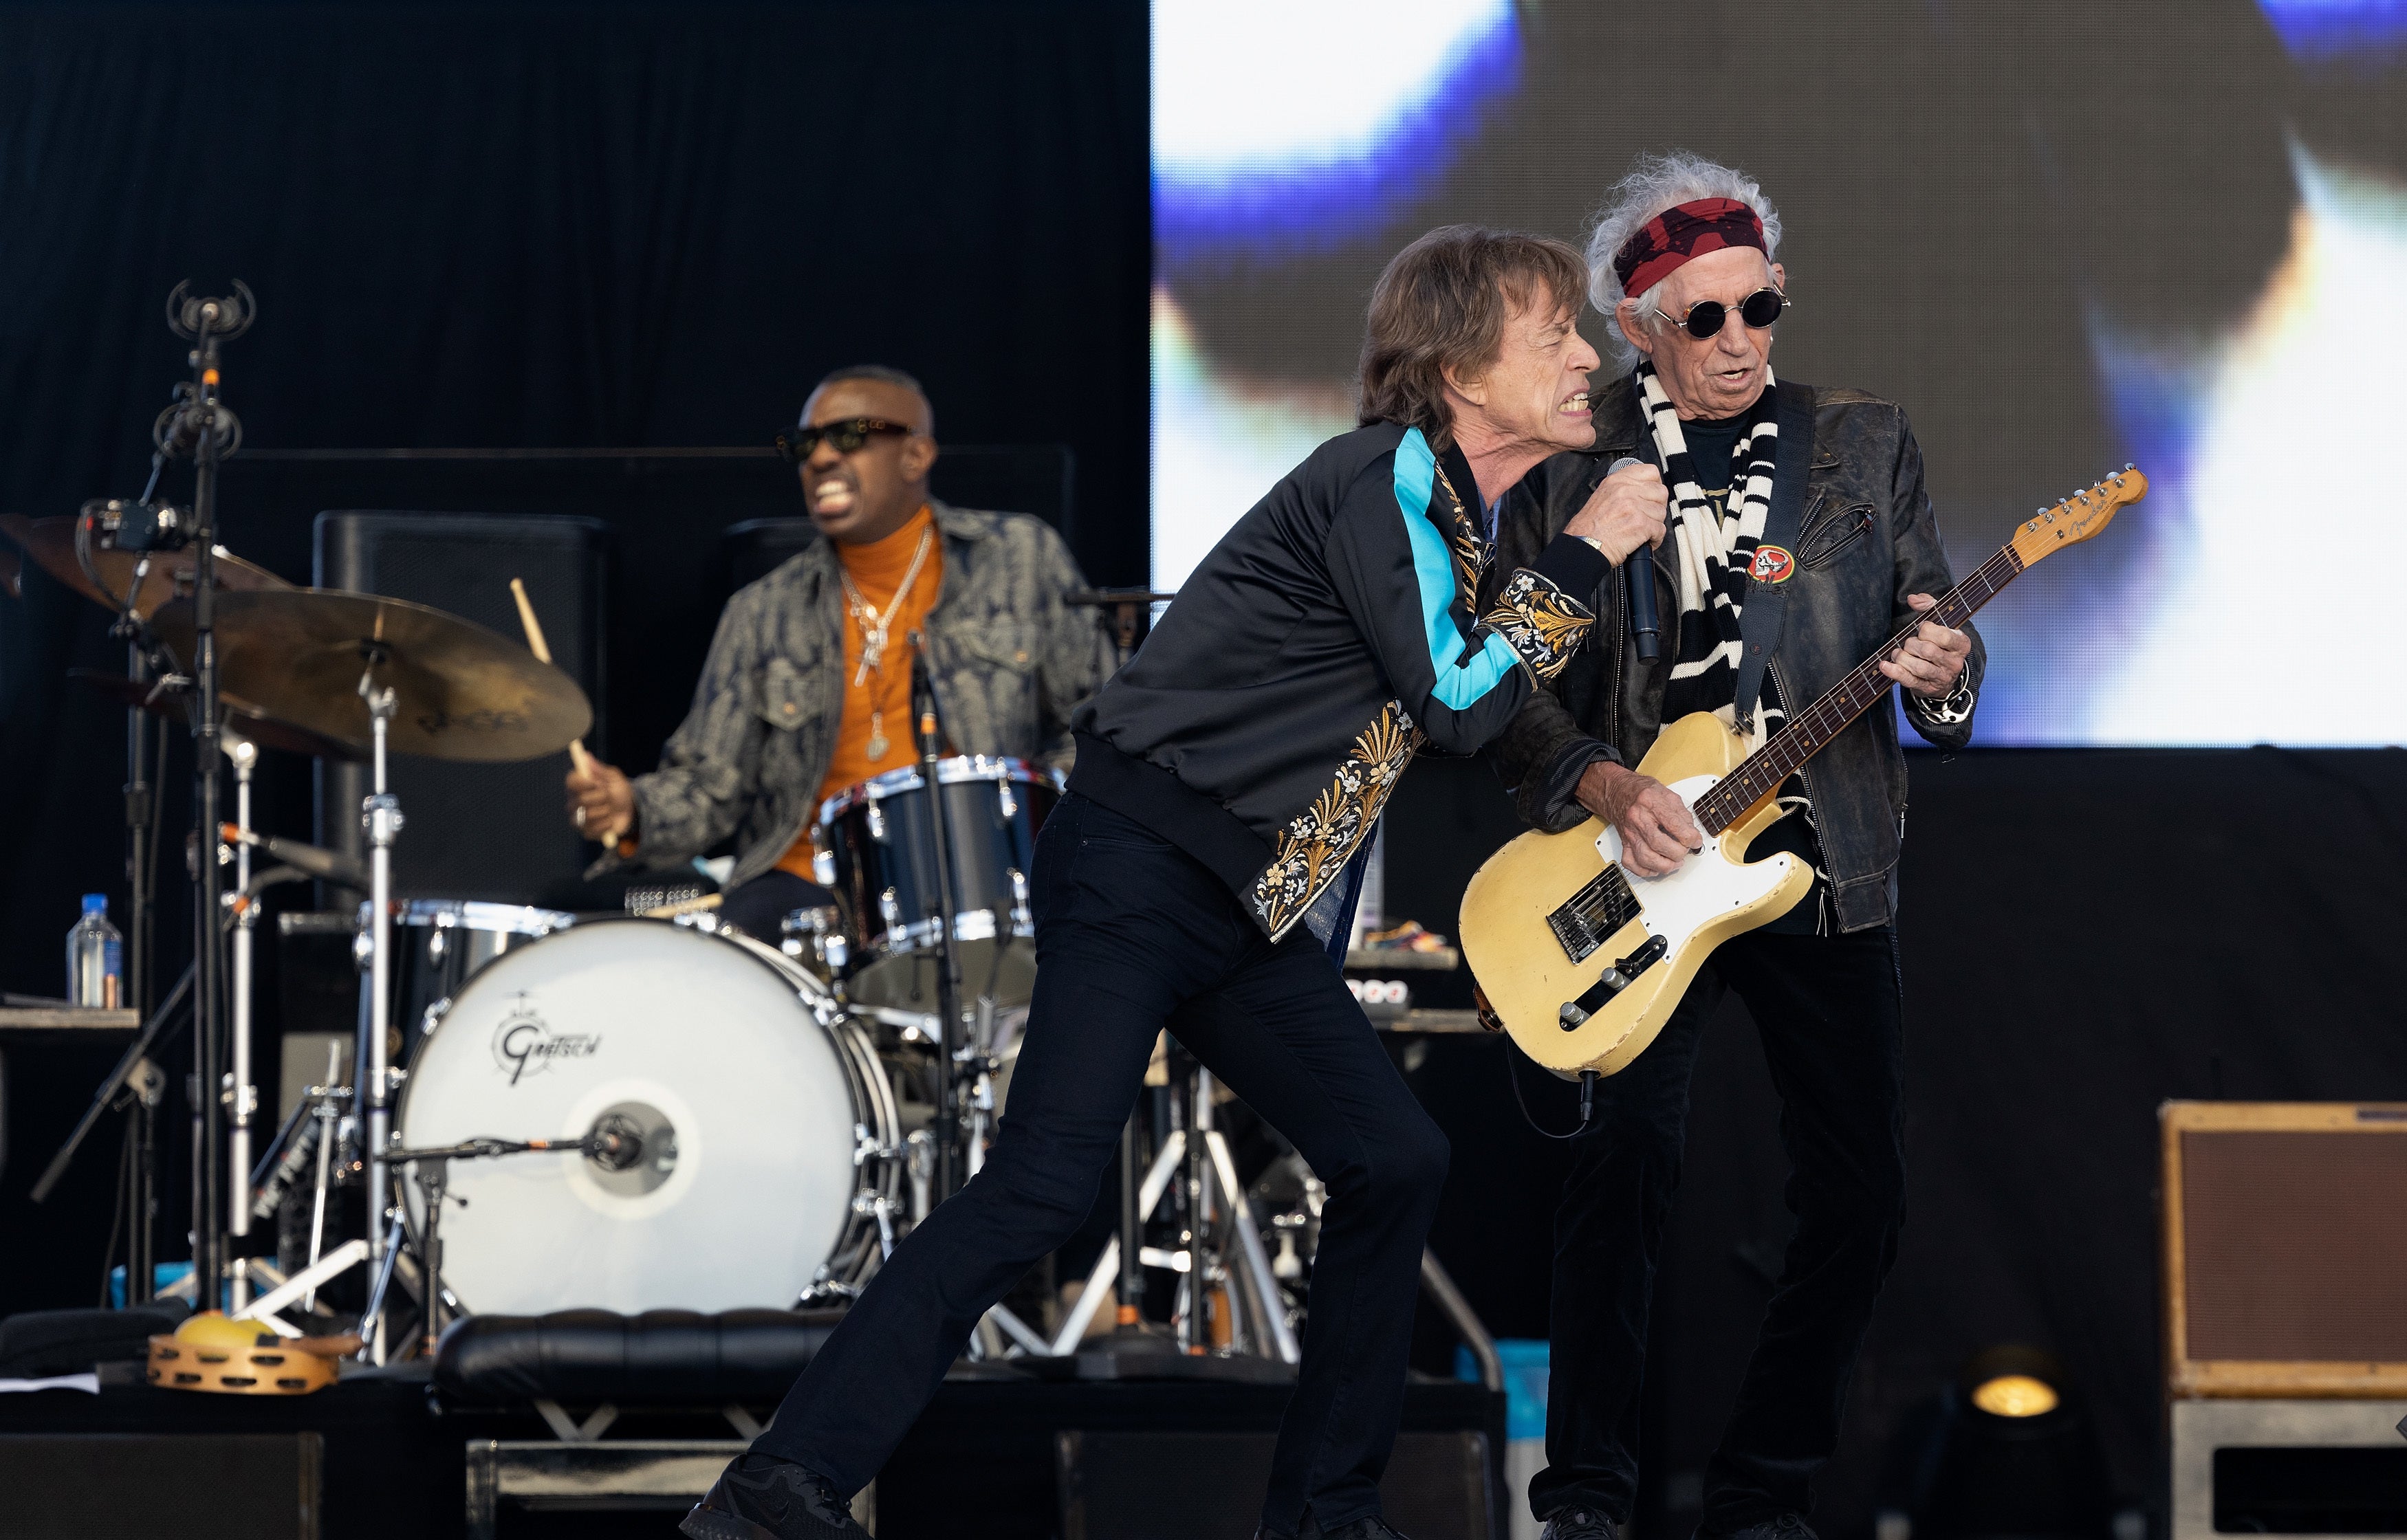 They’re a gas, gas, gas: Mick Jagger and Keith Richards at Hyde Park